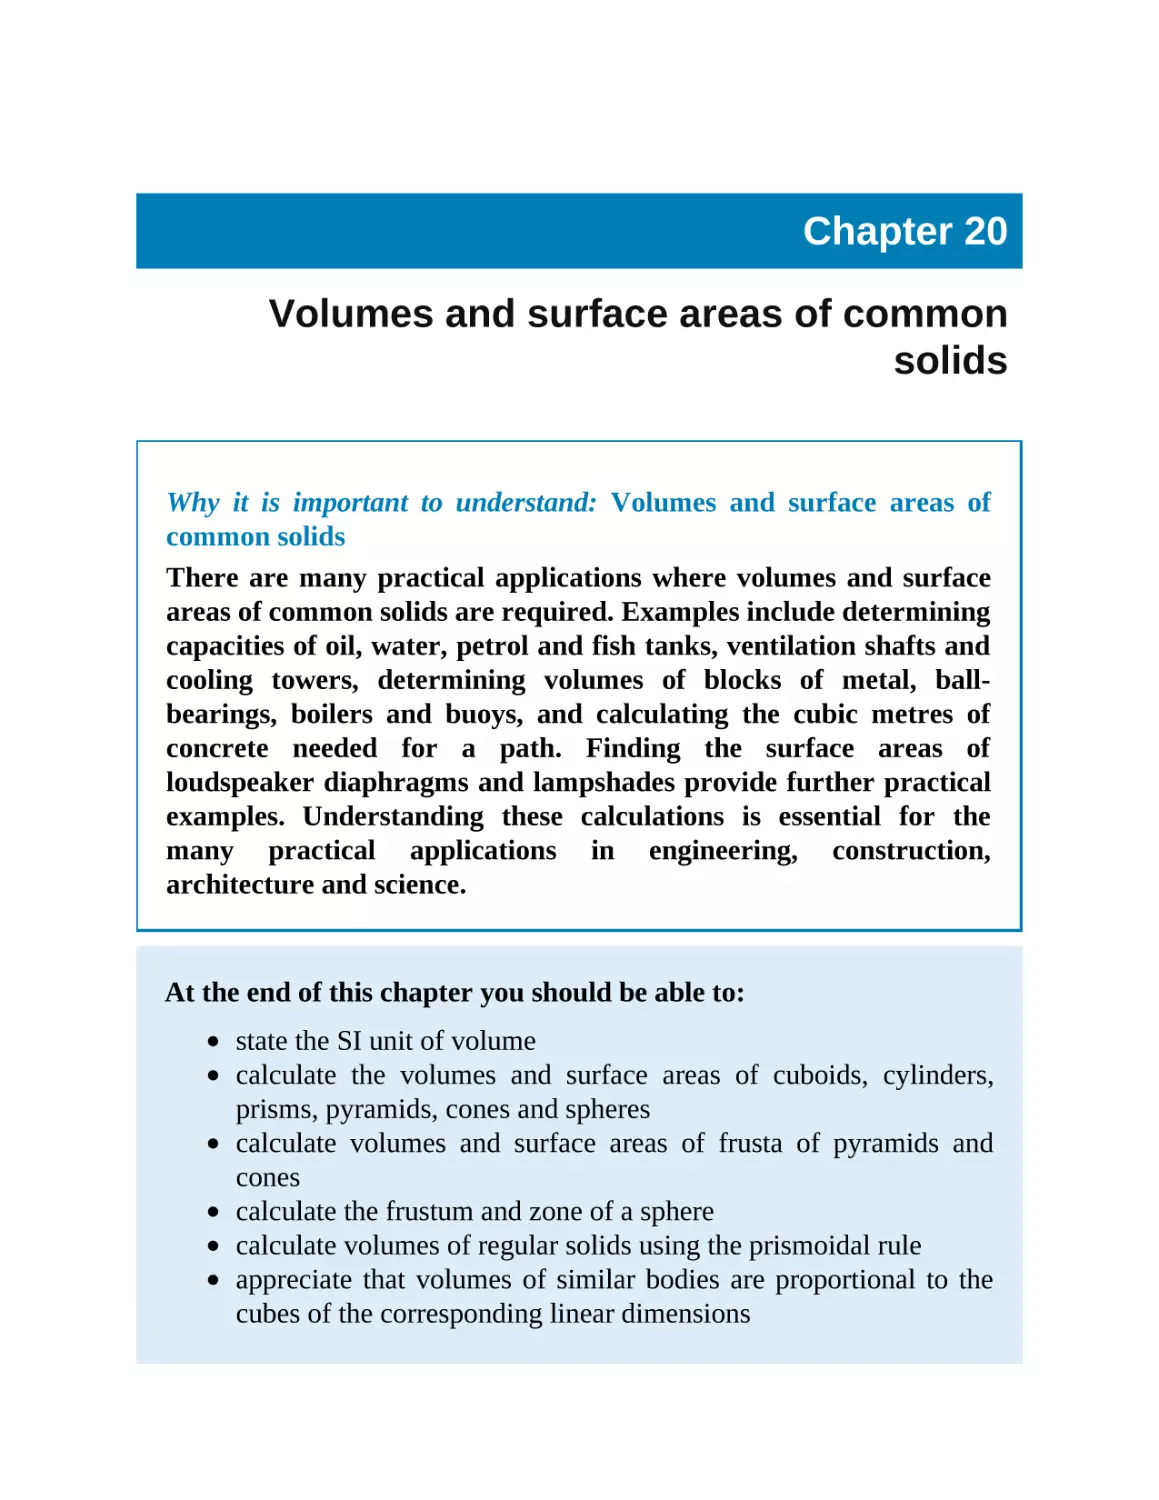 20 Volumes and surface areas of common solids